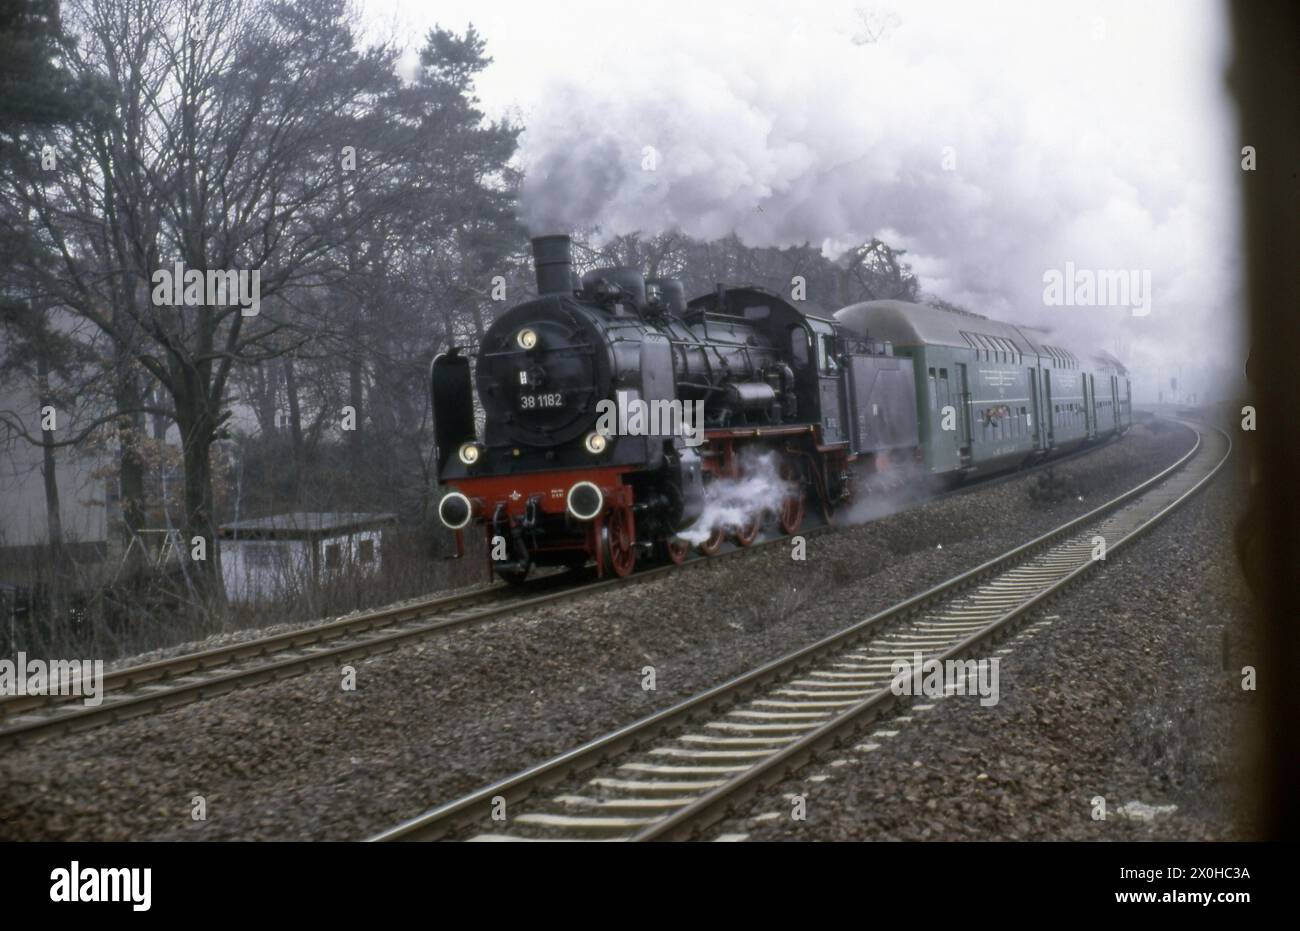 In 1986 there were also special trips for DR railroad enthusiasts in West Berlin on the ZOO-Wannsee-Spandau-ZOO line, here with the BR 38 1182 and a double-decker special train [automated translation] Stock Photo